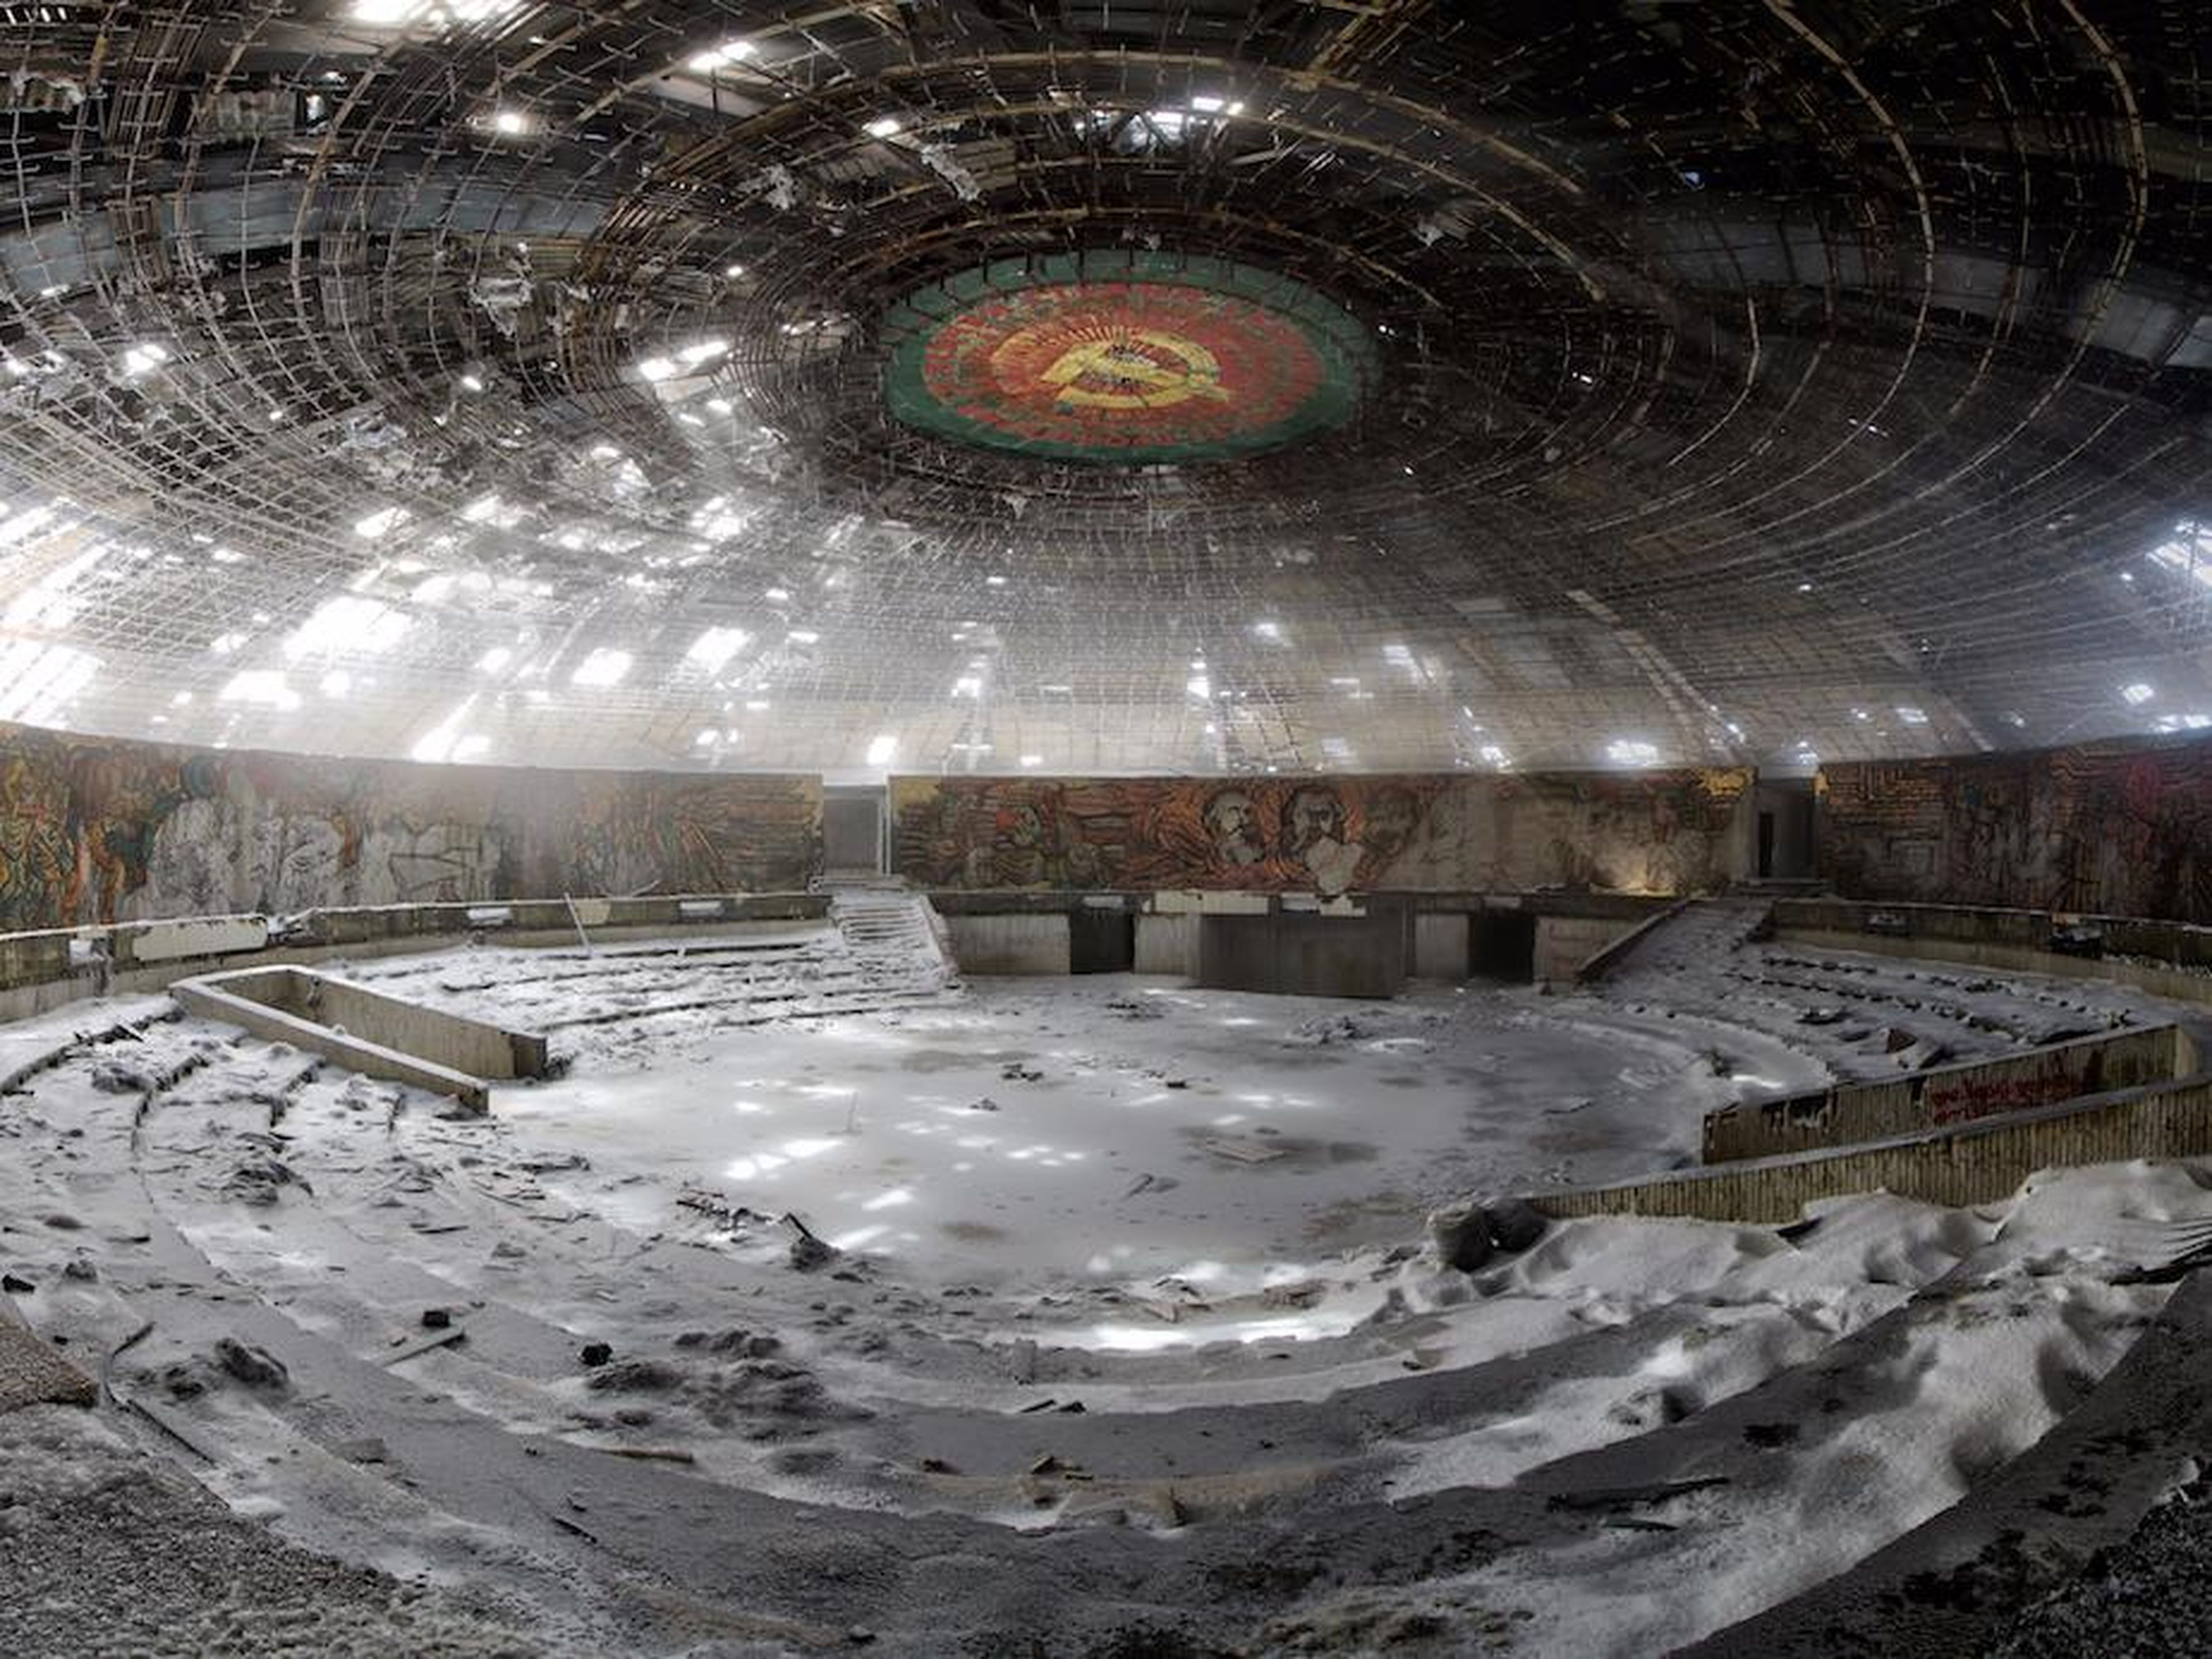 The Buzludzha Monument was once the House of the Bulgarian Communist Party.